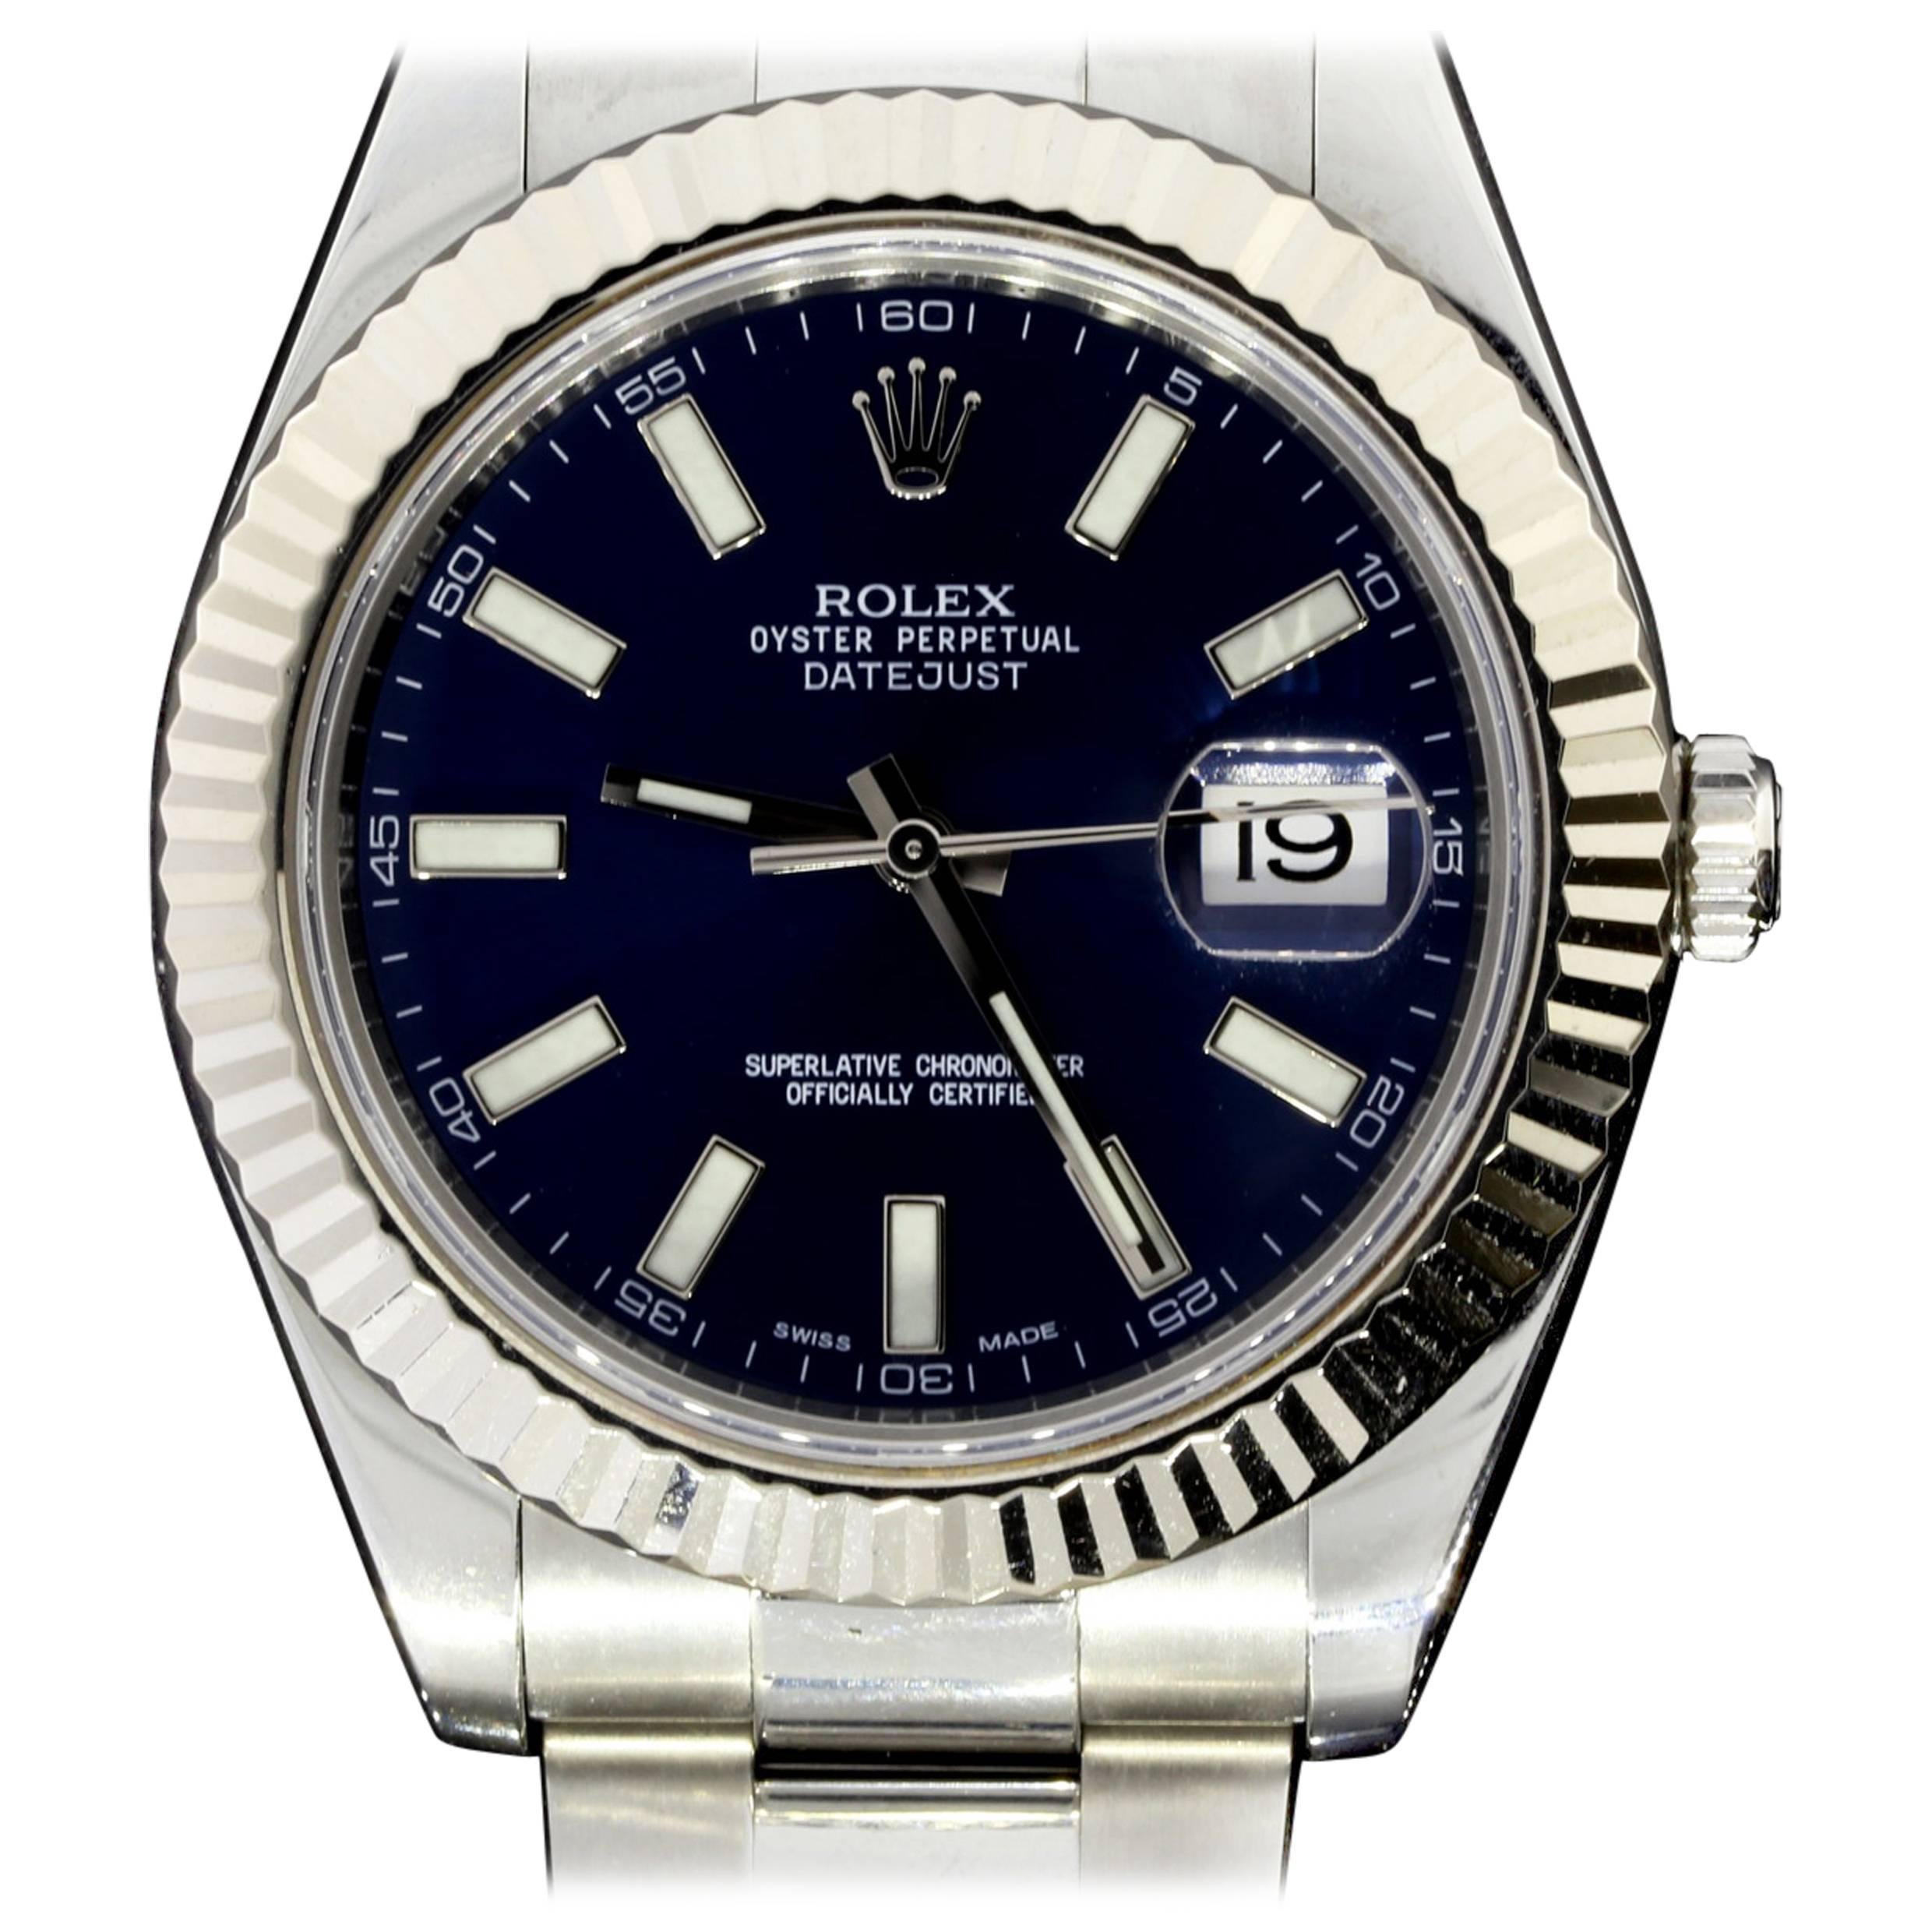 Rolex Stainless Steel Datejust II Blue Dial Automatic Wristwatch Ref 116334 